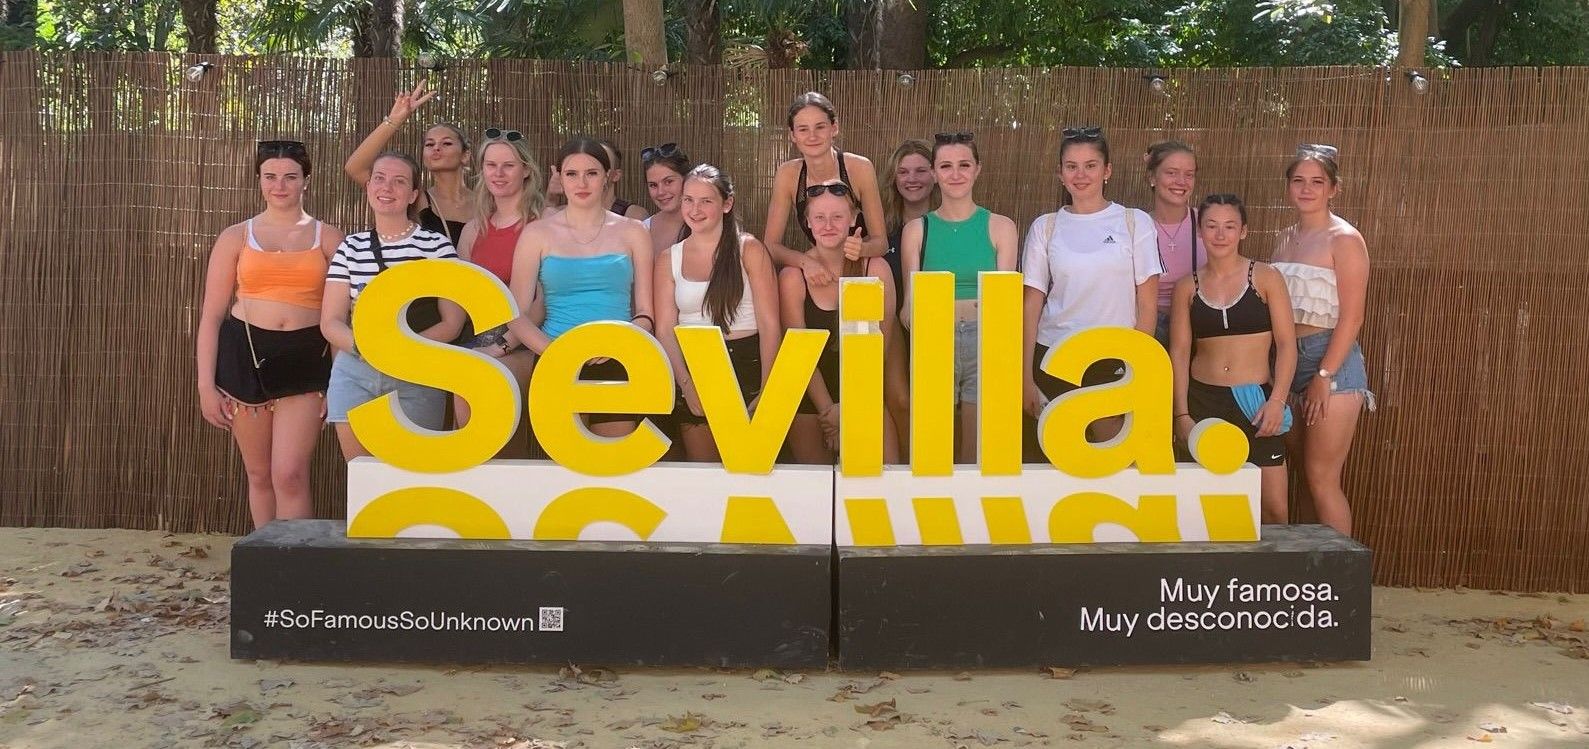 North Kent College Sports Coaching and Performance students arrive in Seville crop